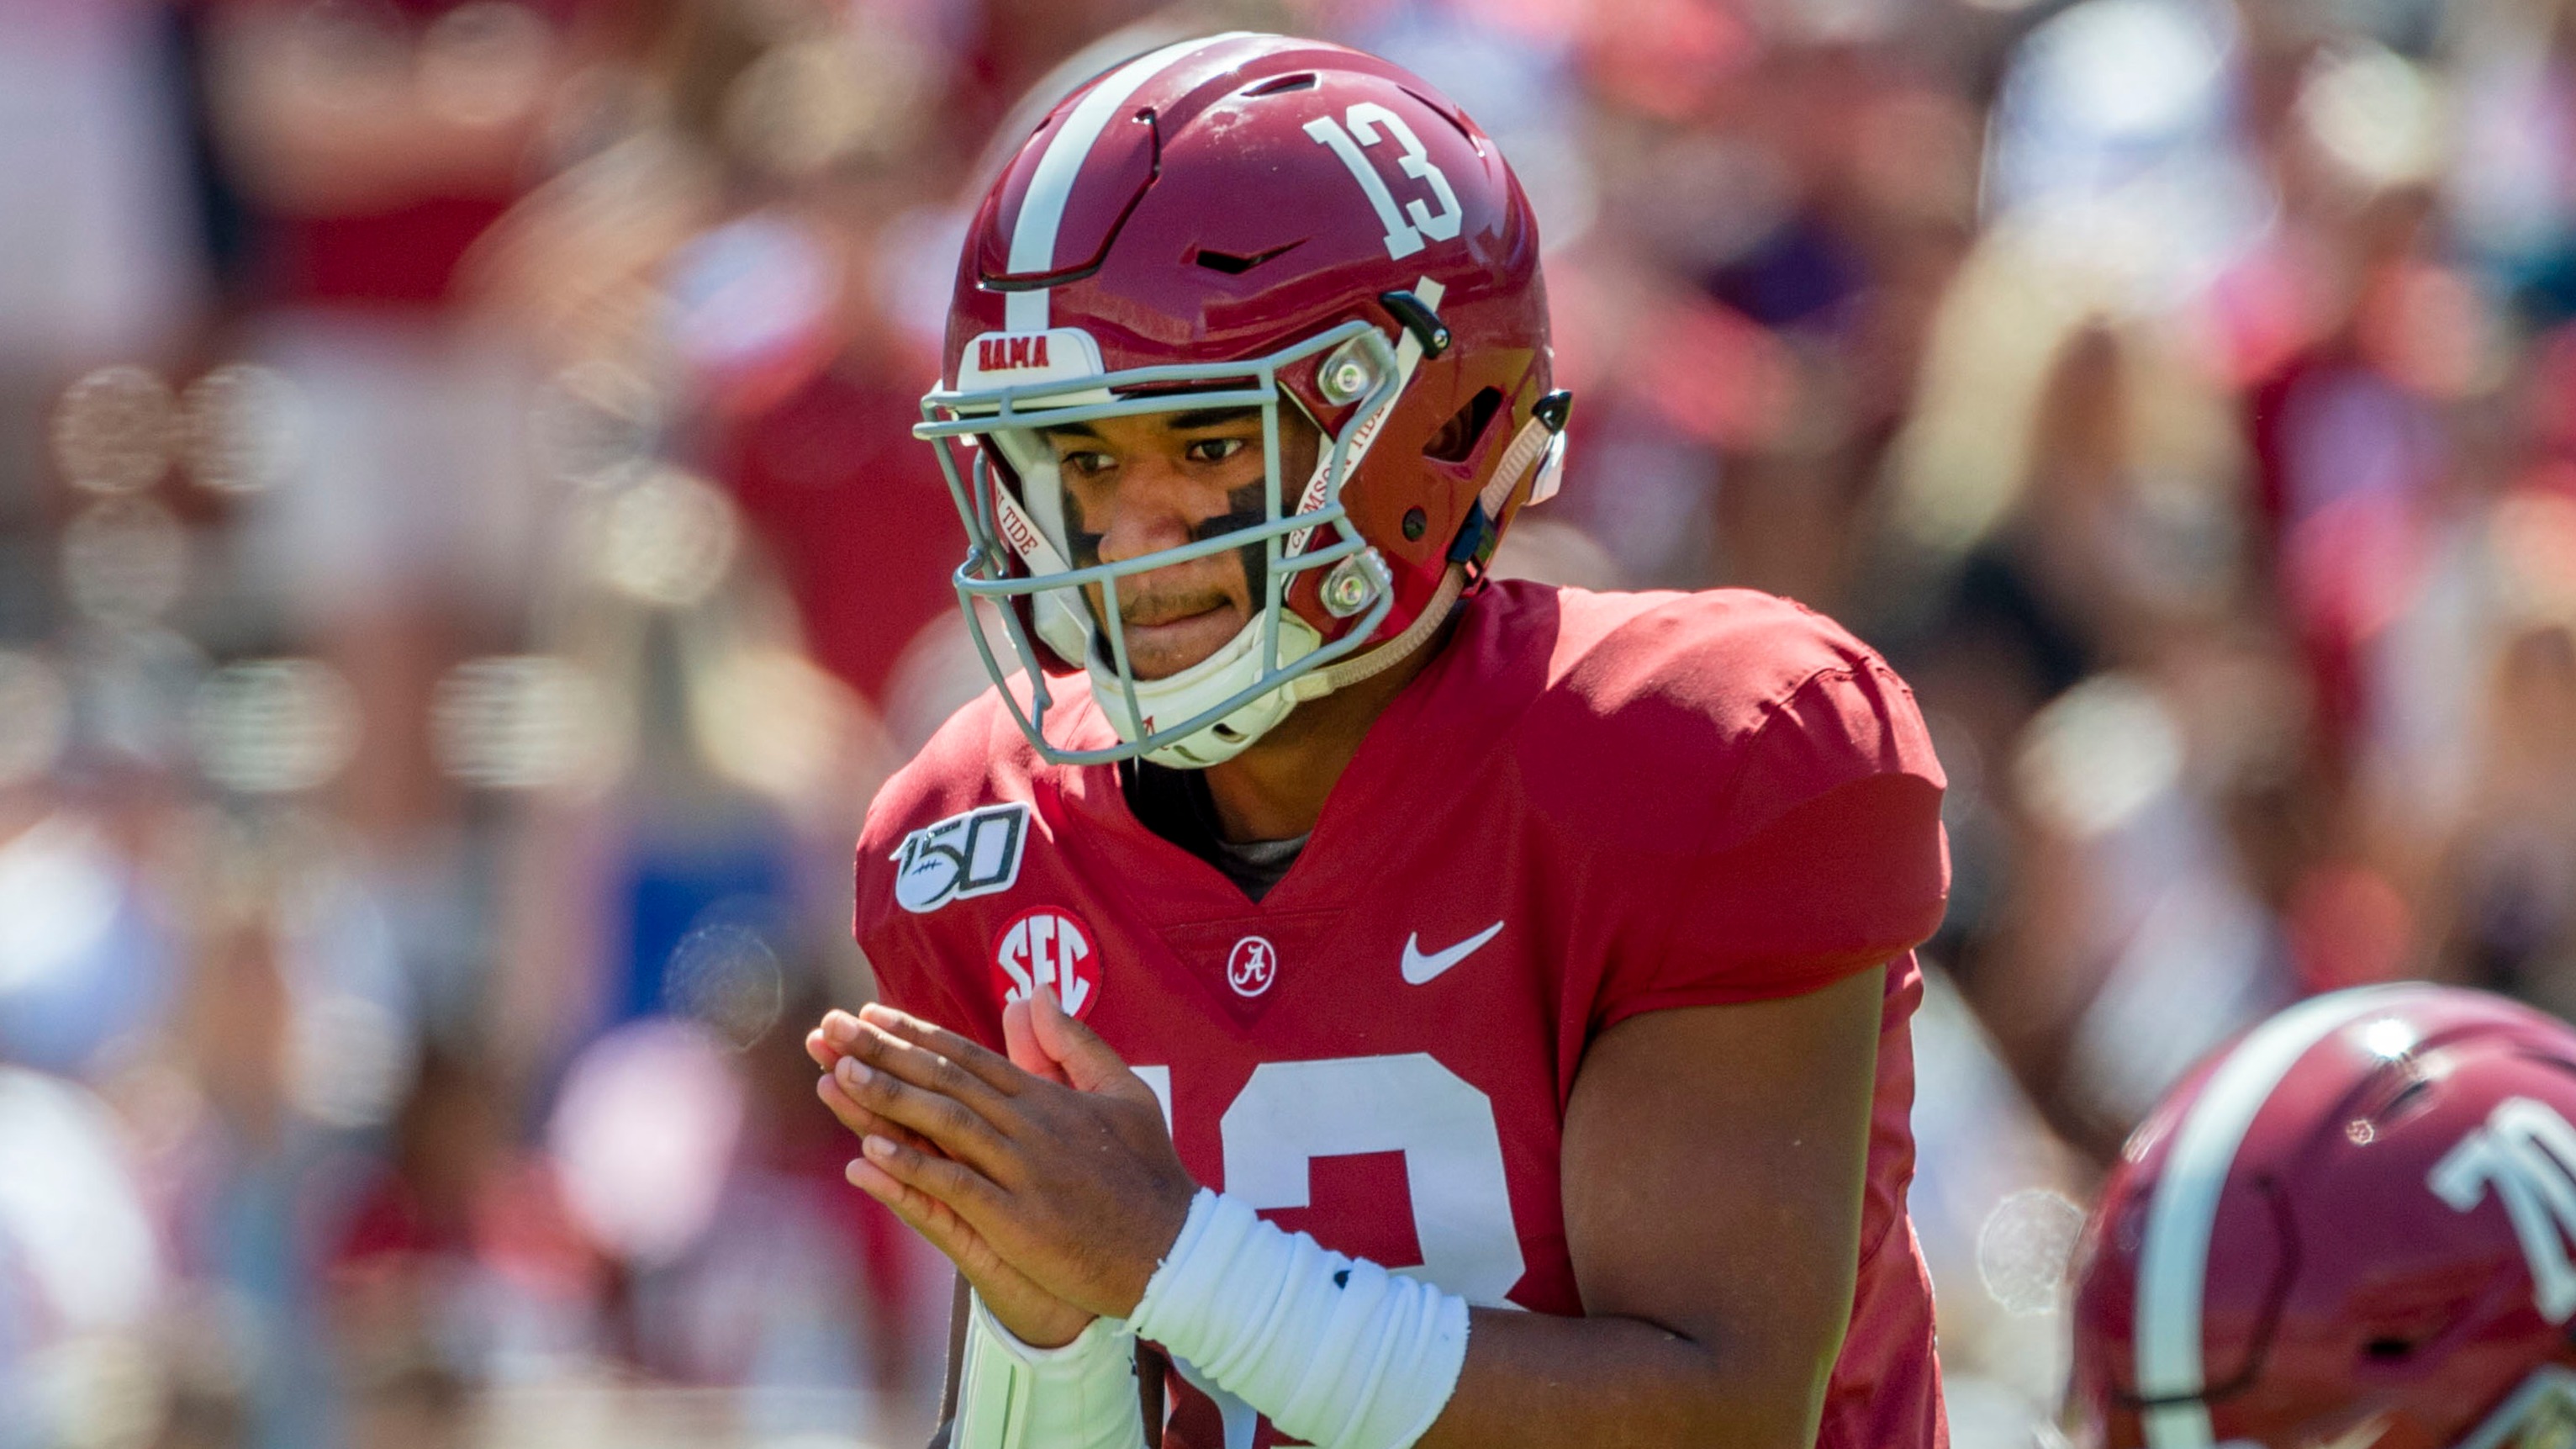 Tagovailoa out for season after hip injury vs Mississippi St